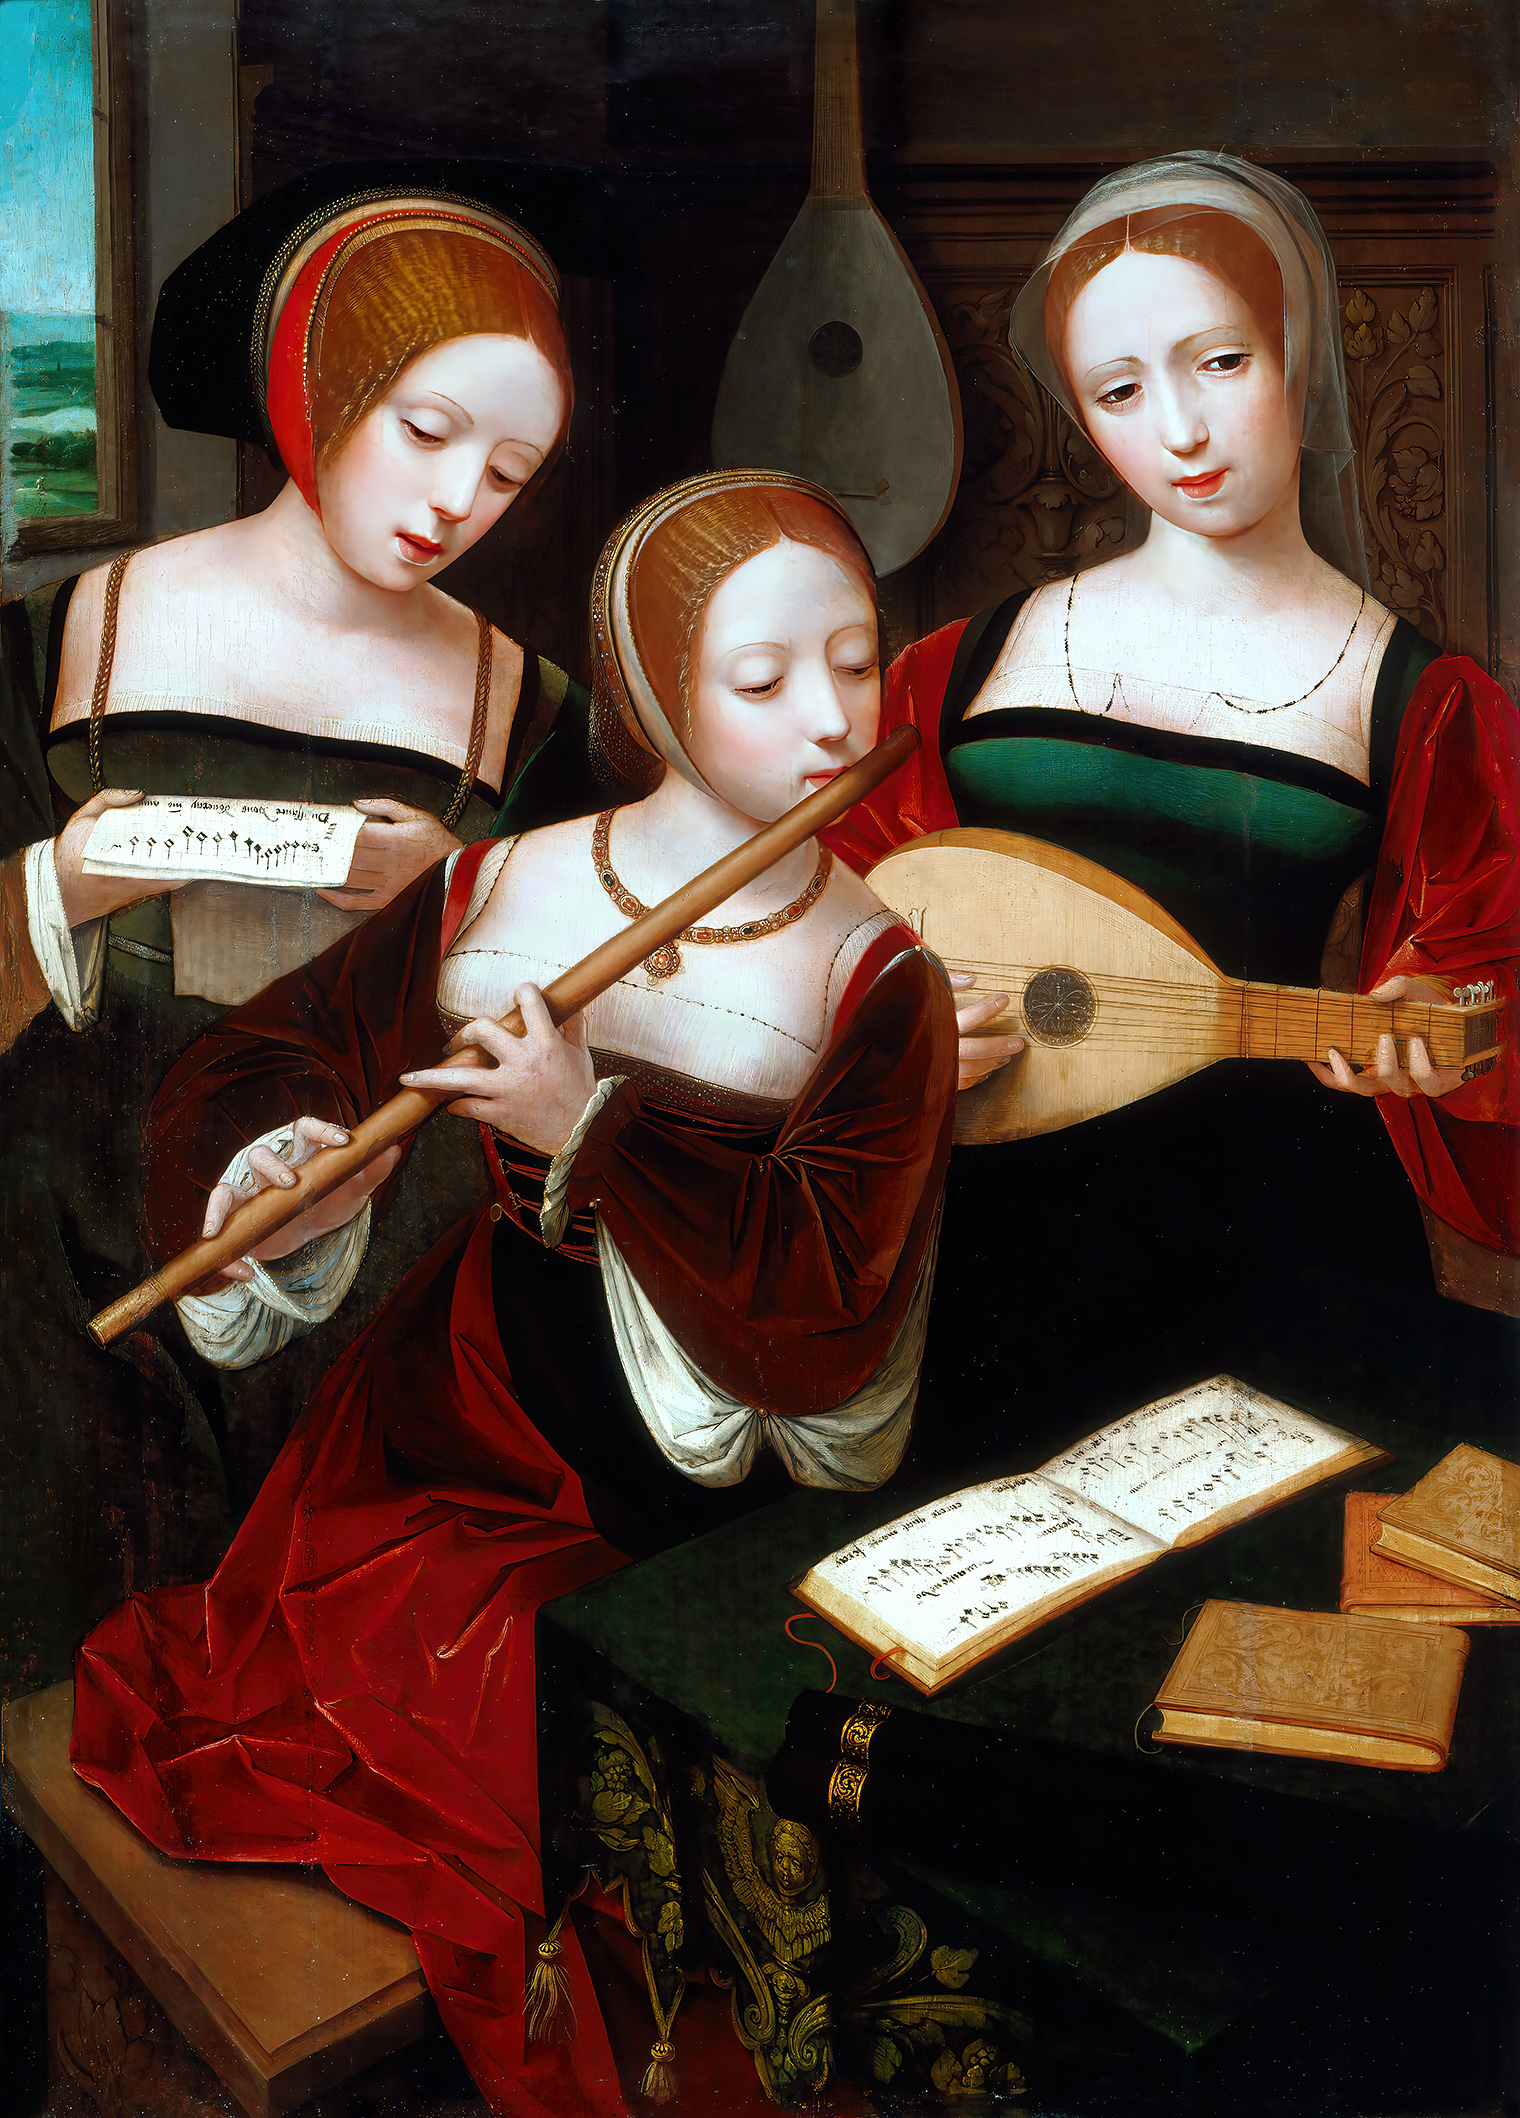 The Renaissance Musical Style